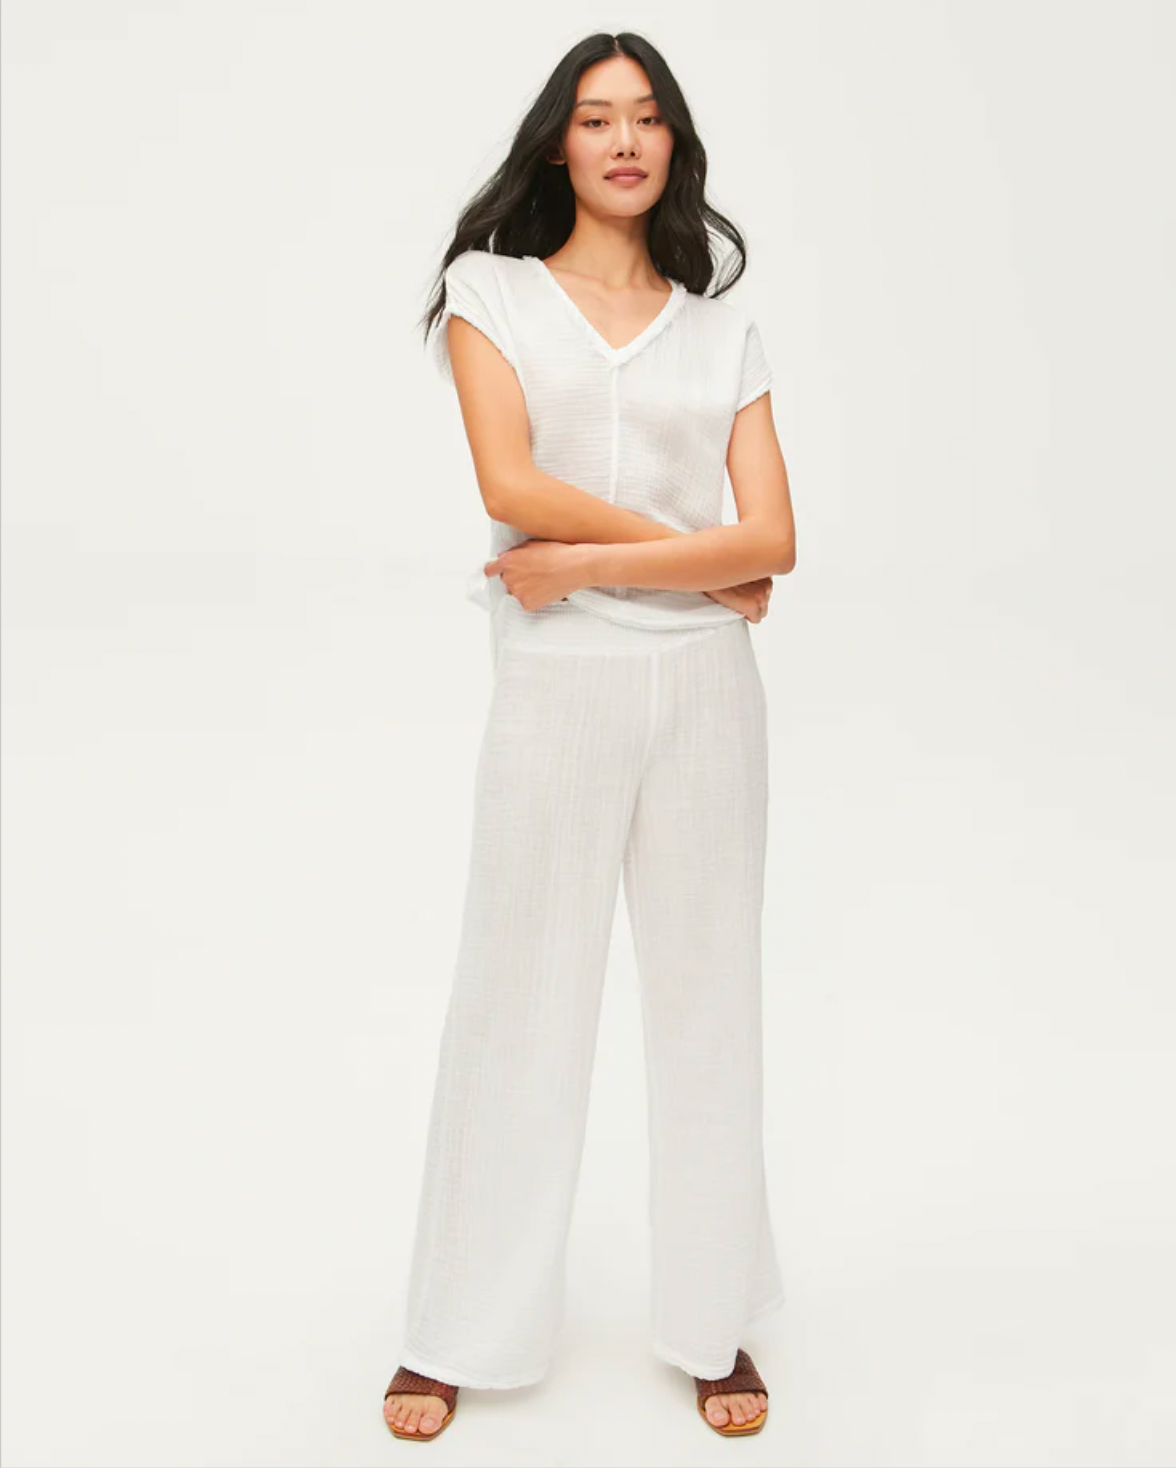 Model Wearing Michael Stars Susie Smocked Waist Pant In White Wearing White Top On A White Background